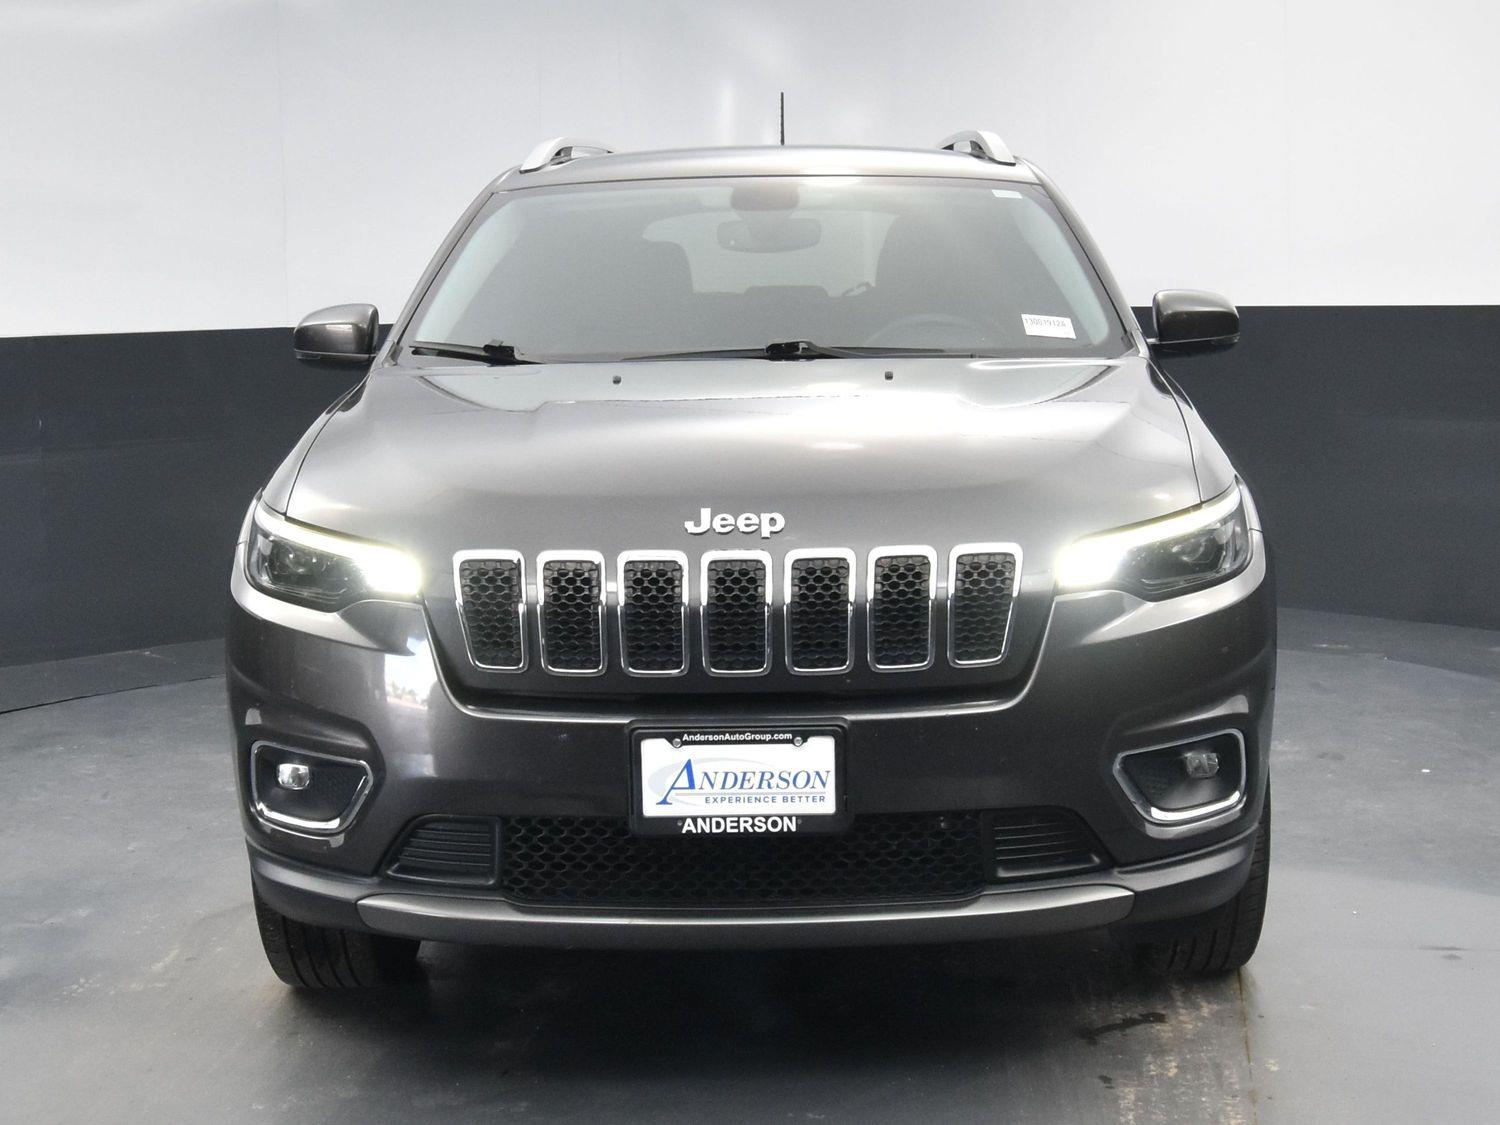 Used 2020 Jeep Cherokee Limited SUV for sale in Grand Island NE